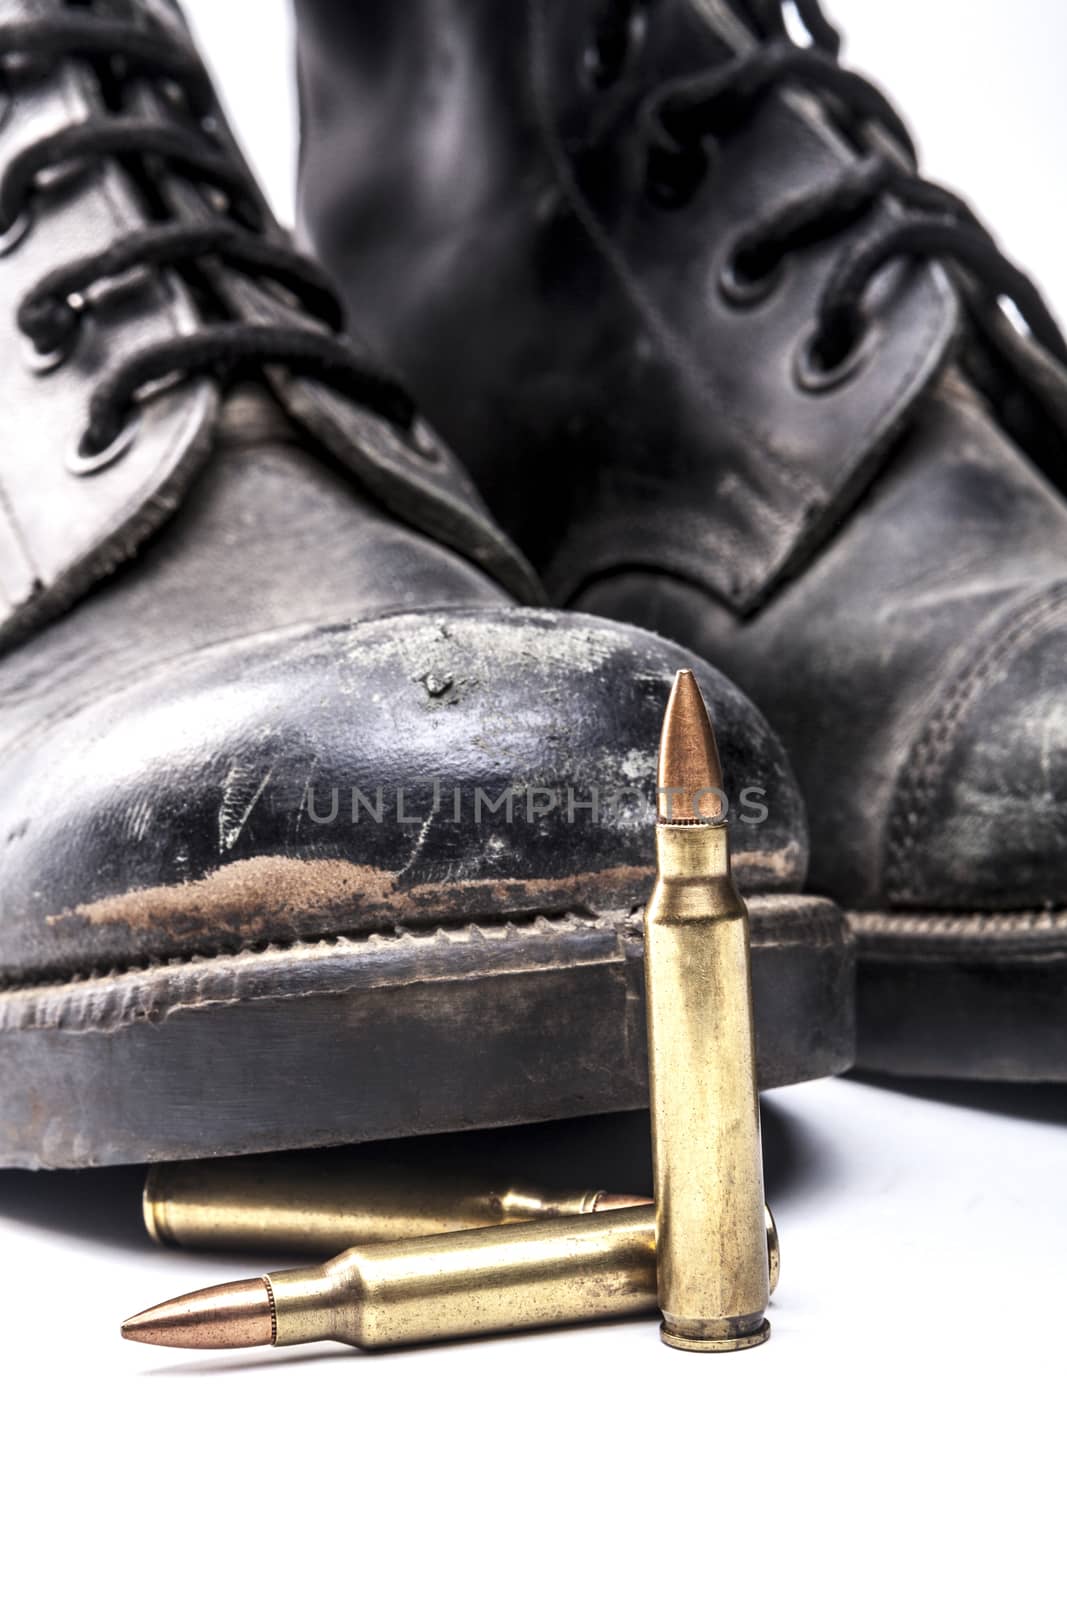 Bullets and Boots by orcearo